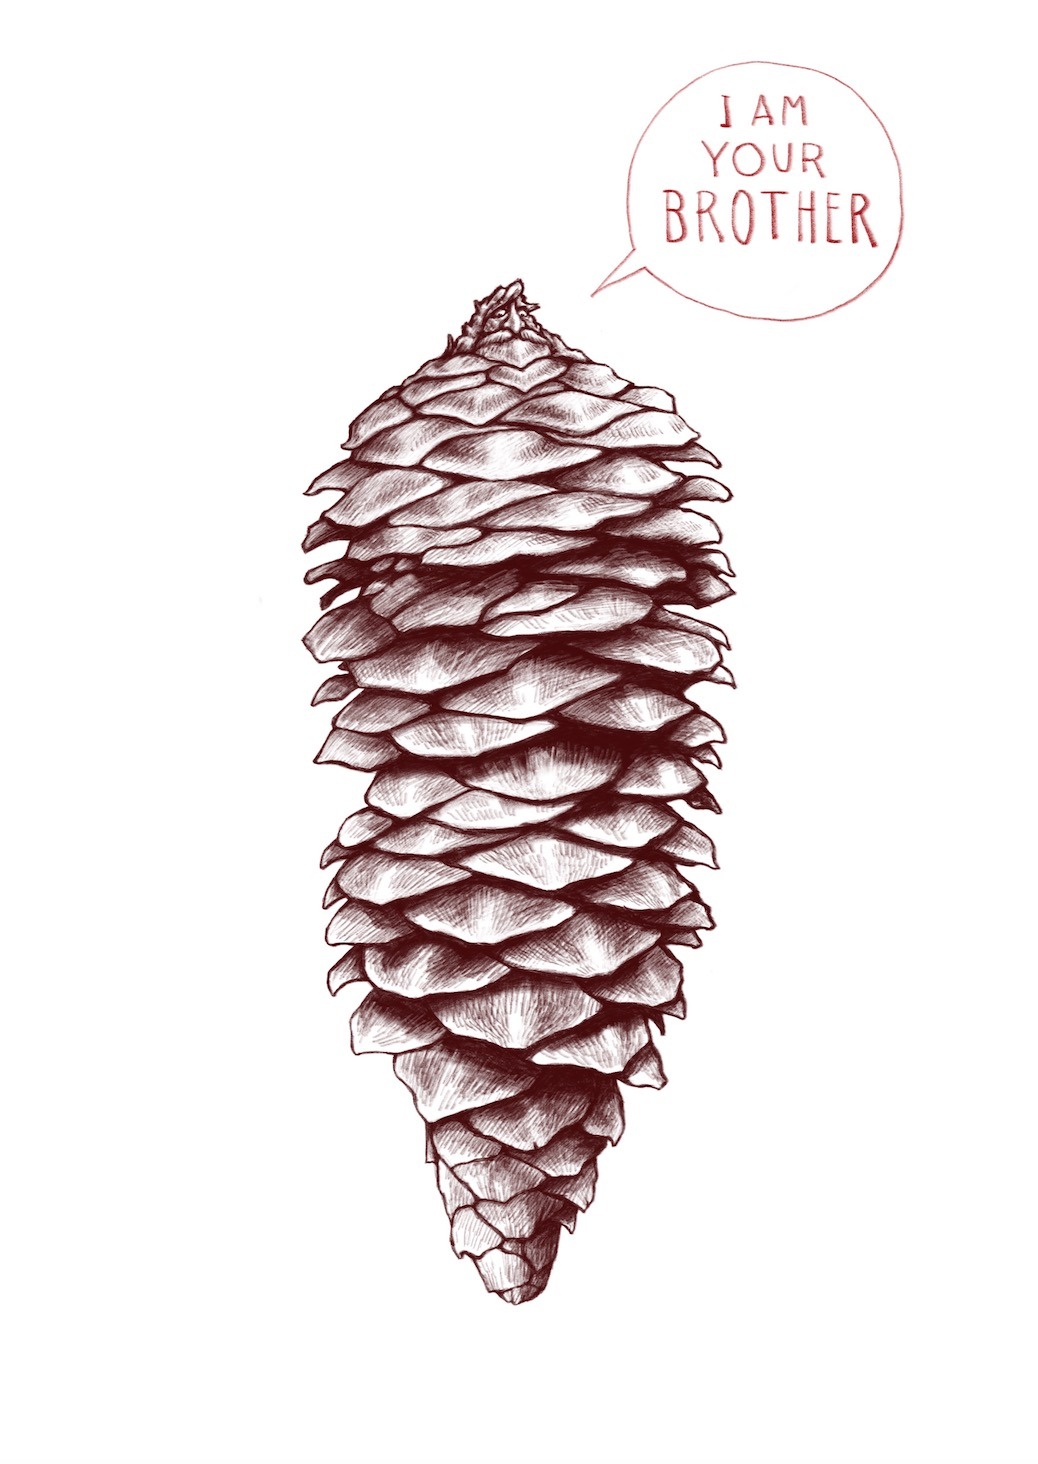 Pine cone’s voice… nature is speaking to us. A call of contributing in this planetary action